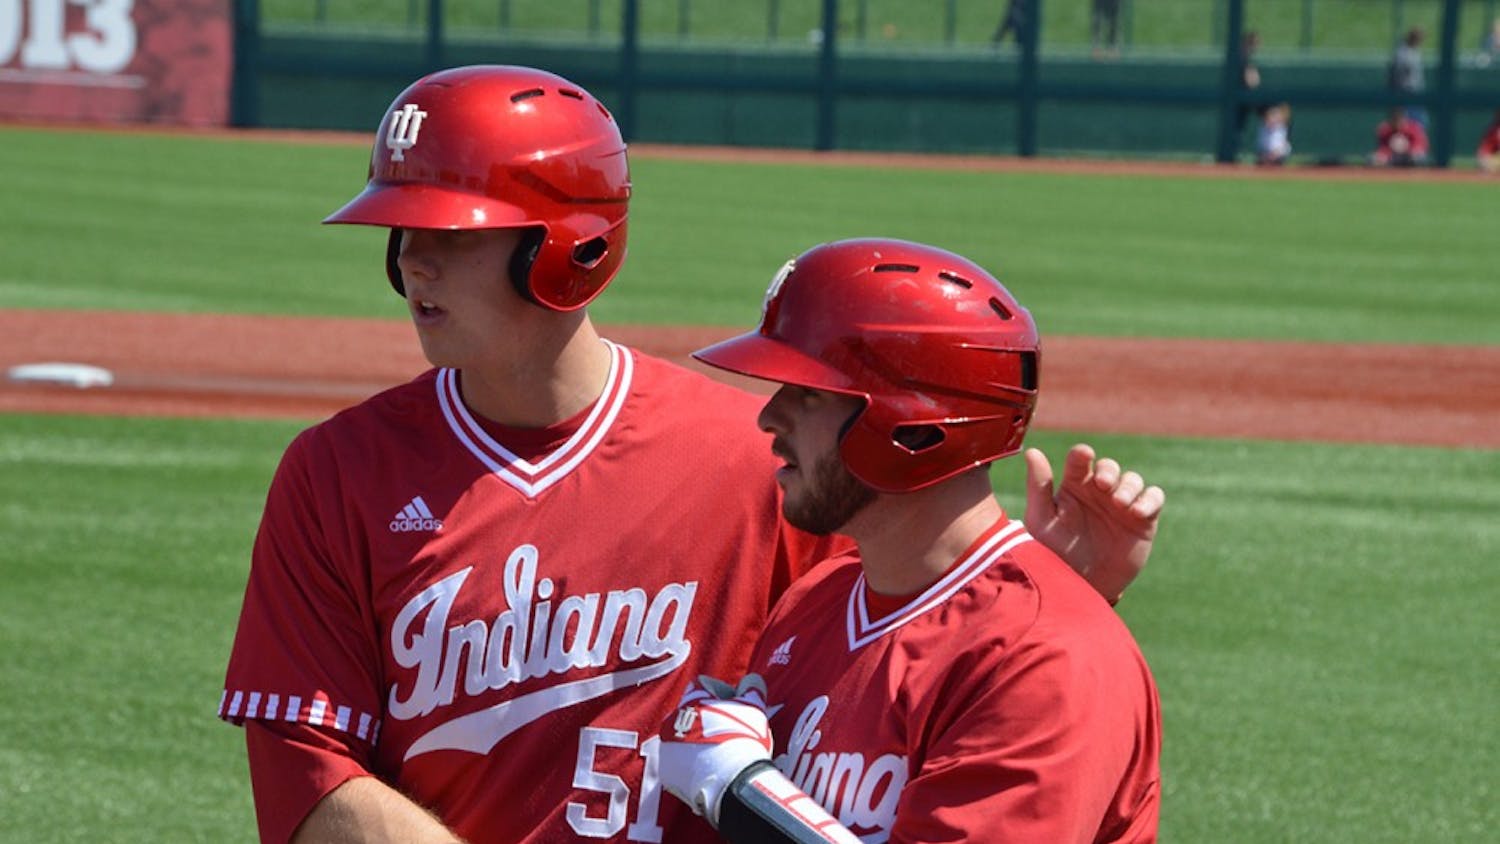 Senior Alex Krupa congratulates junior Logan Sowers on his first double of game three against Nebraska. Sowers hit an RBI double to get IU on the board against Indiana State in the Hoosiers' 2-0 win.